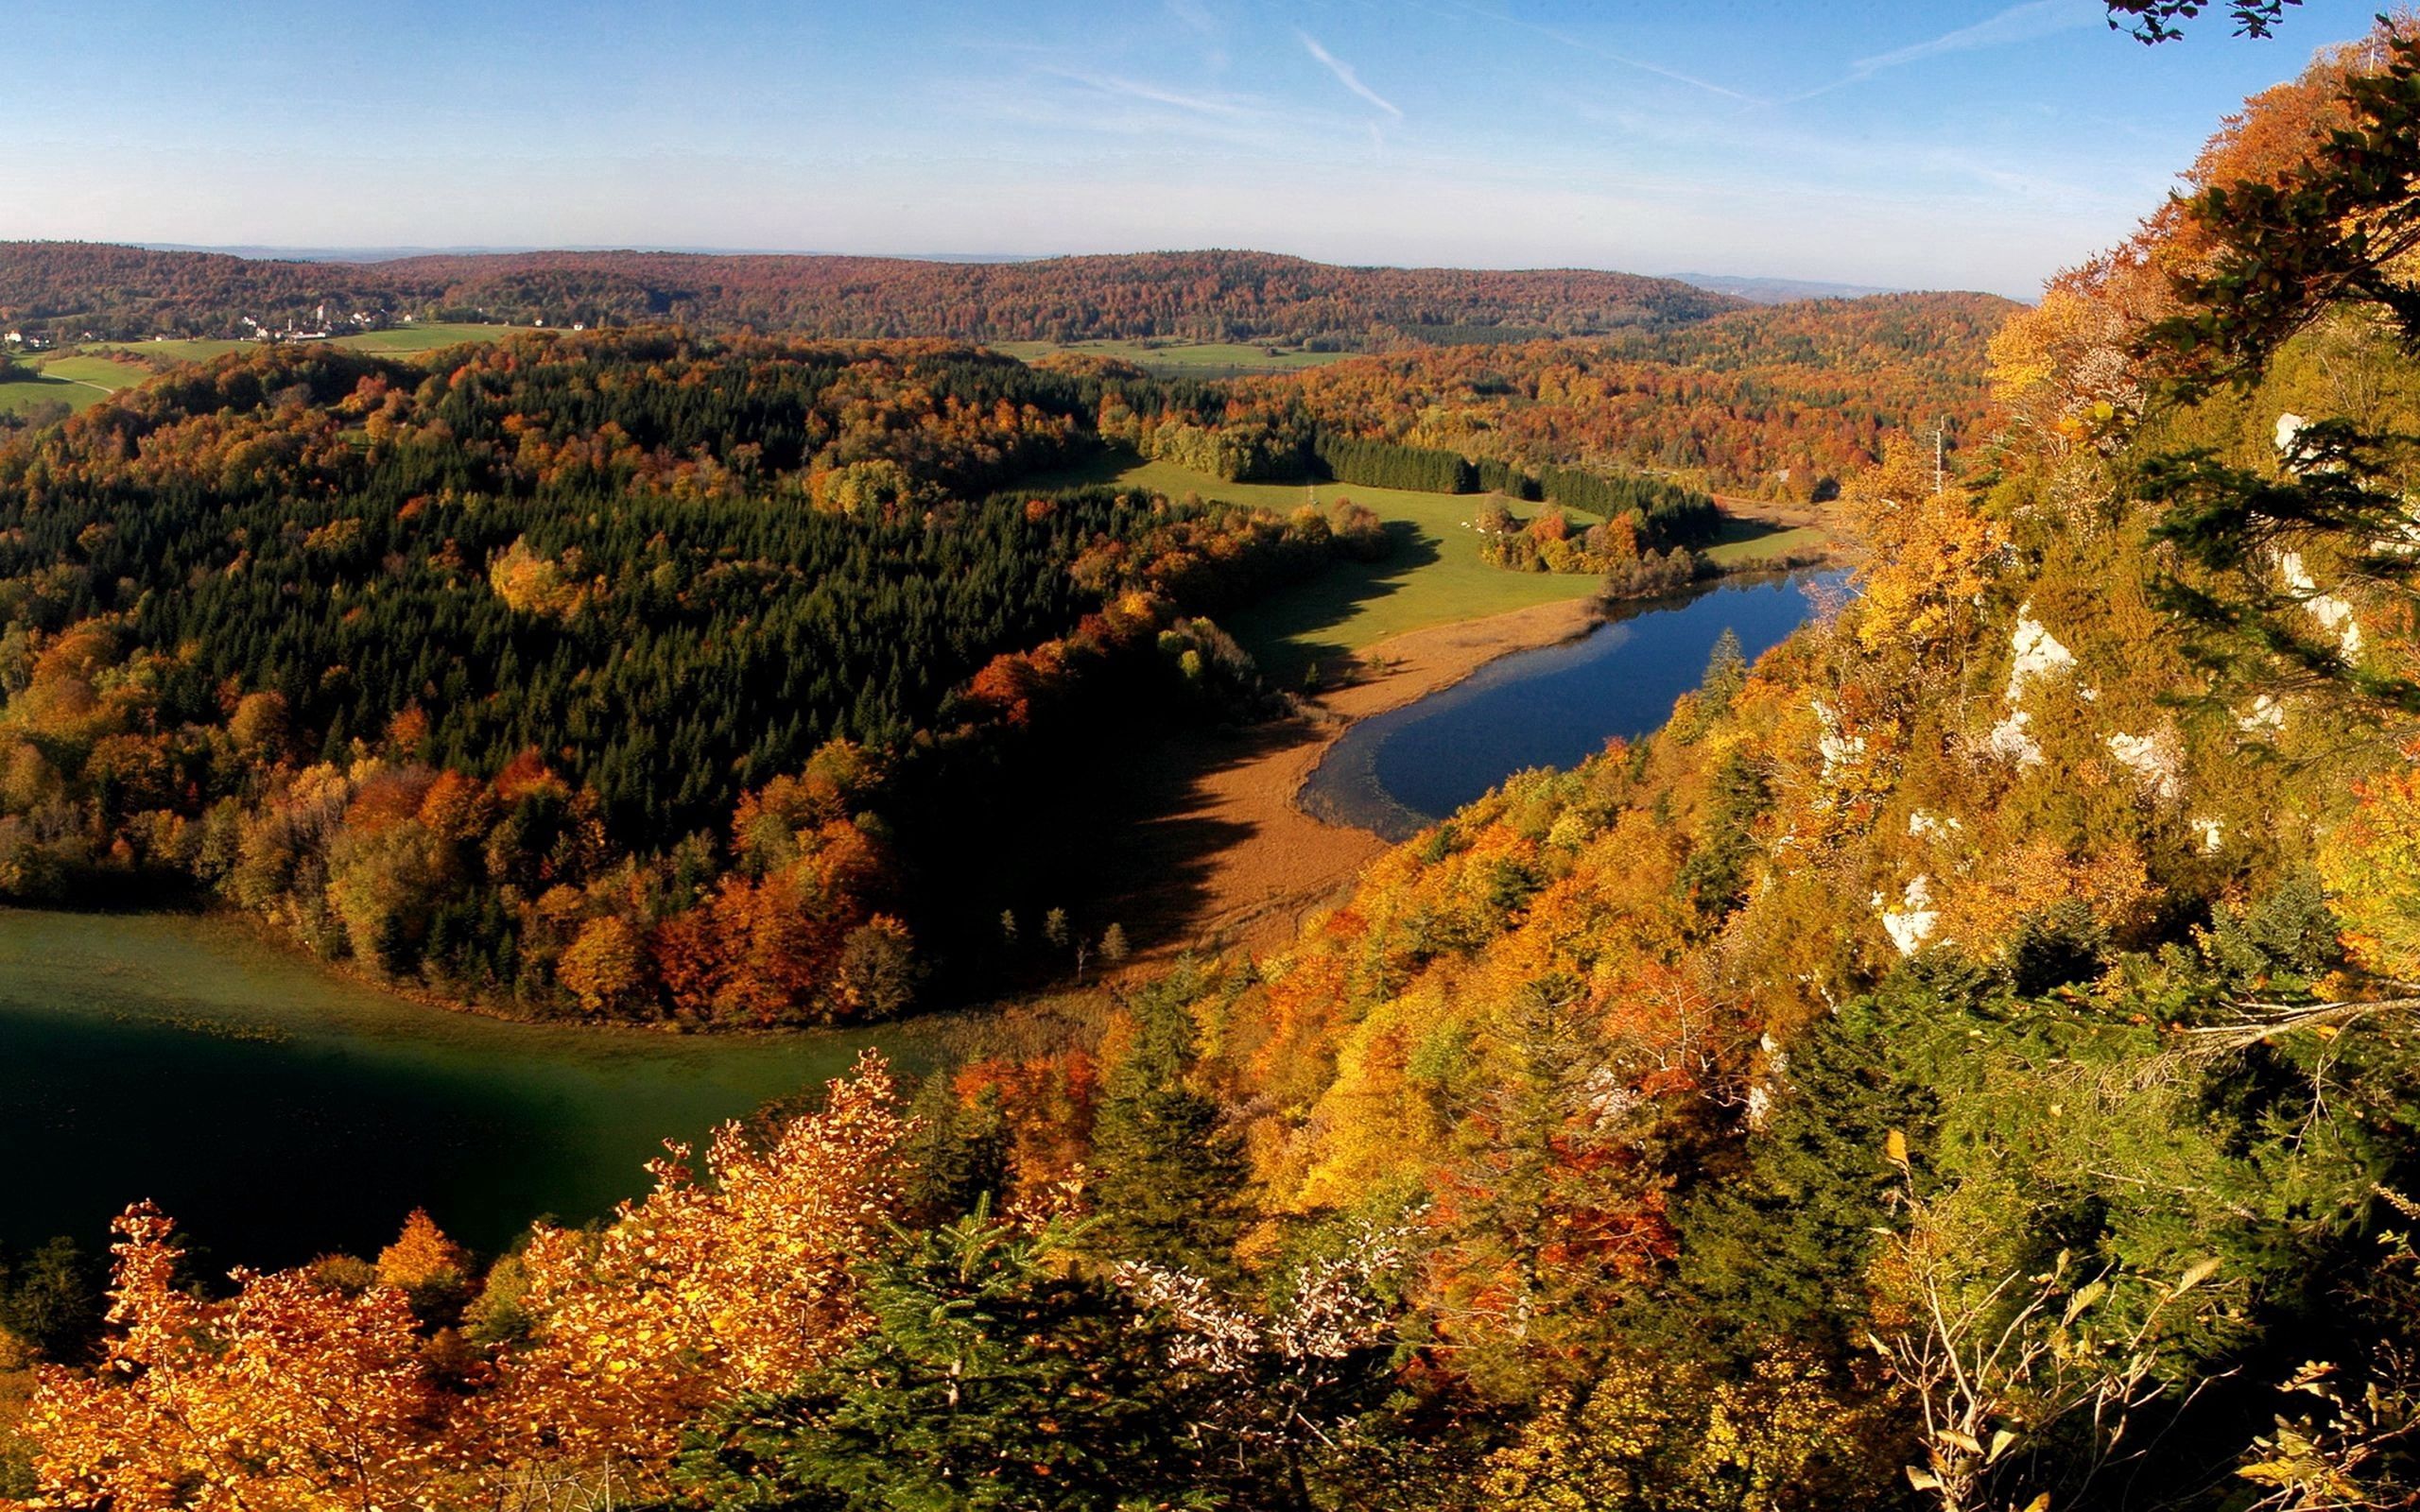 Widescreen image rivers, nature, view from above, autumn